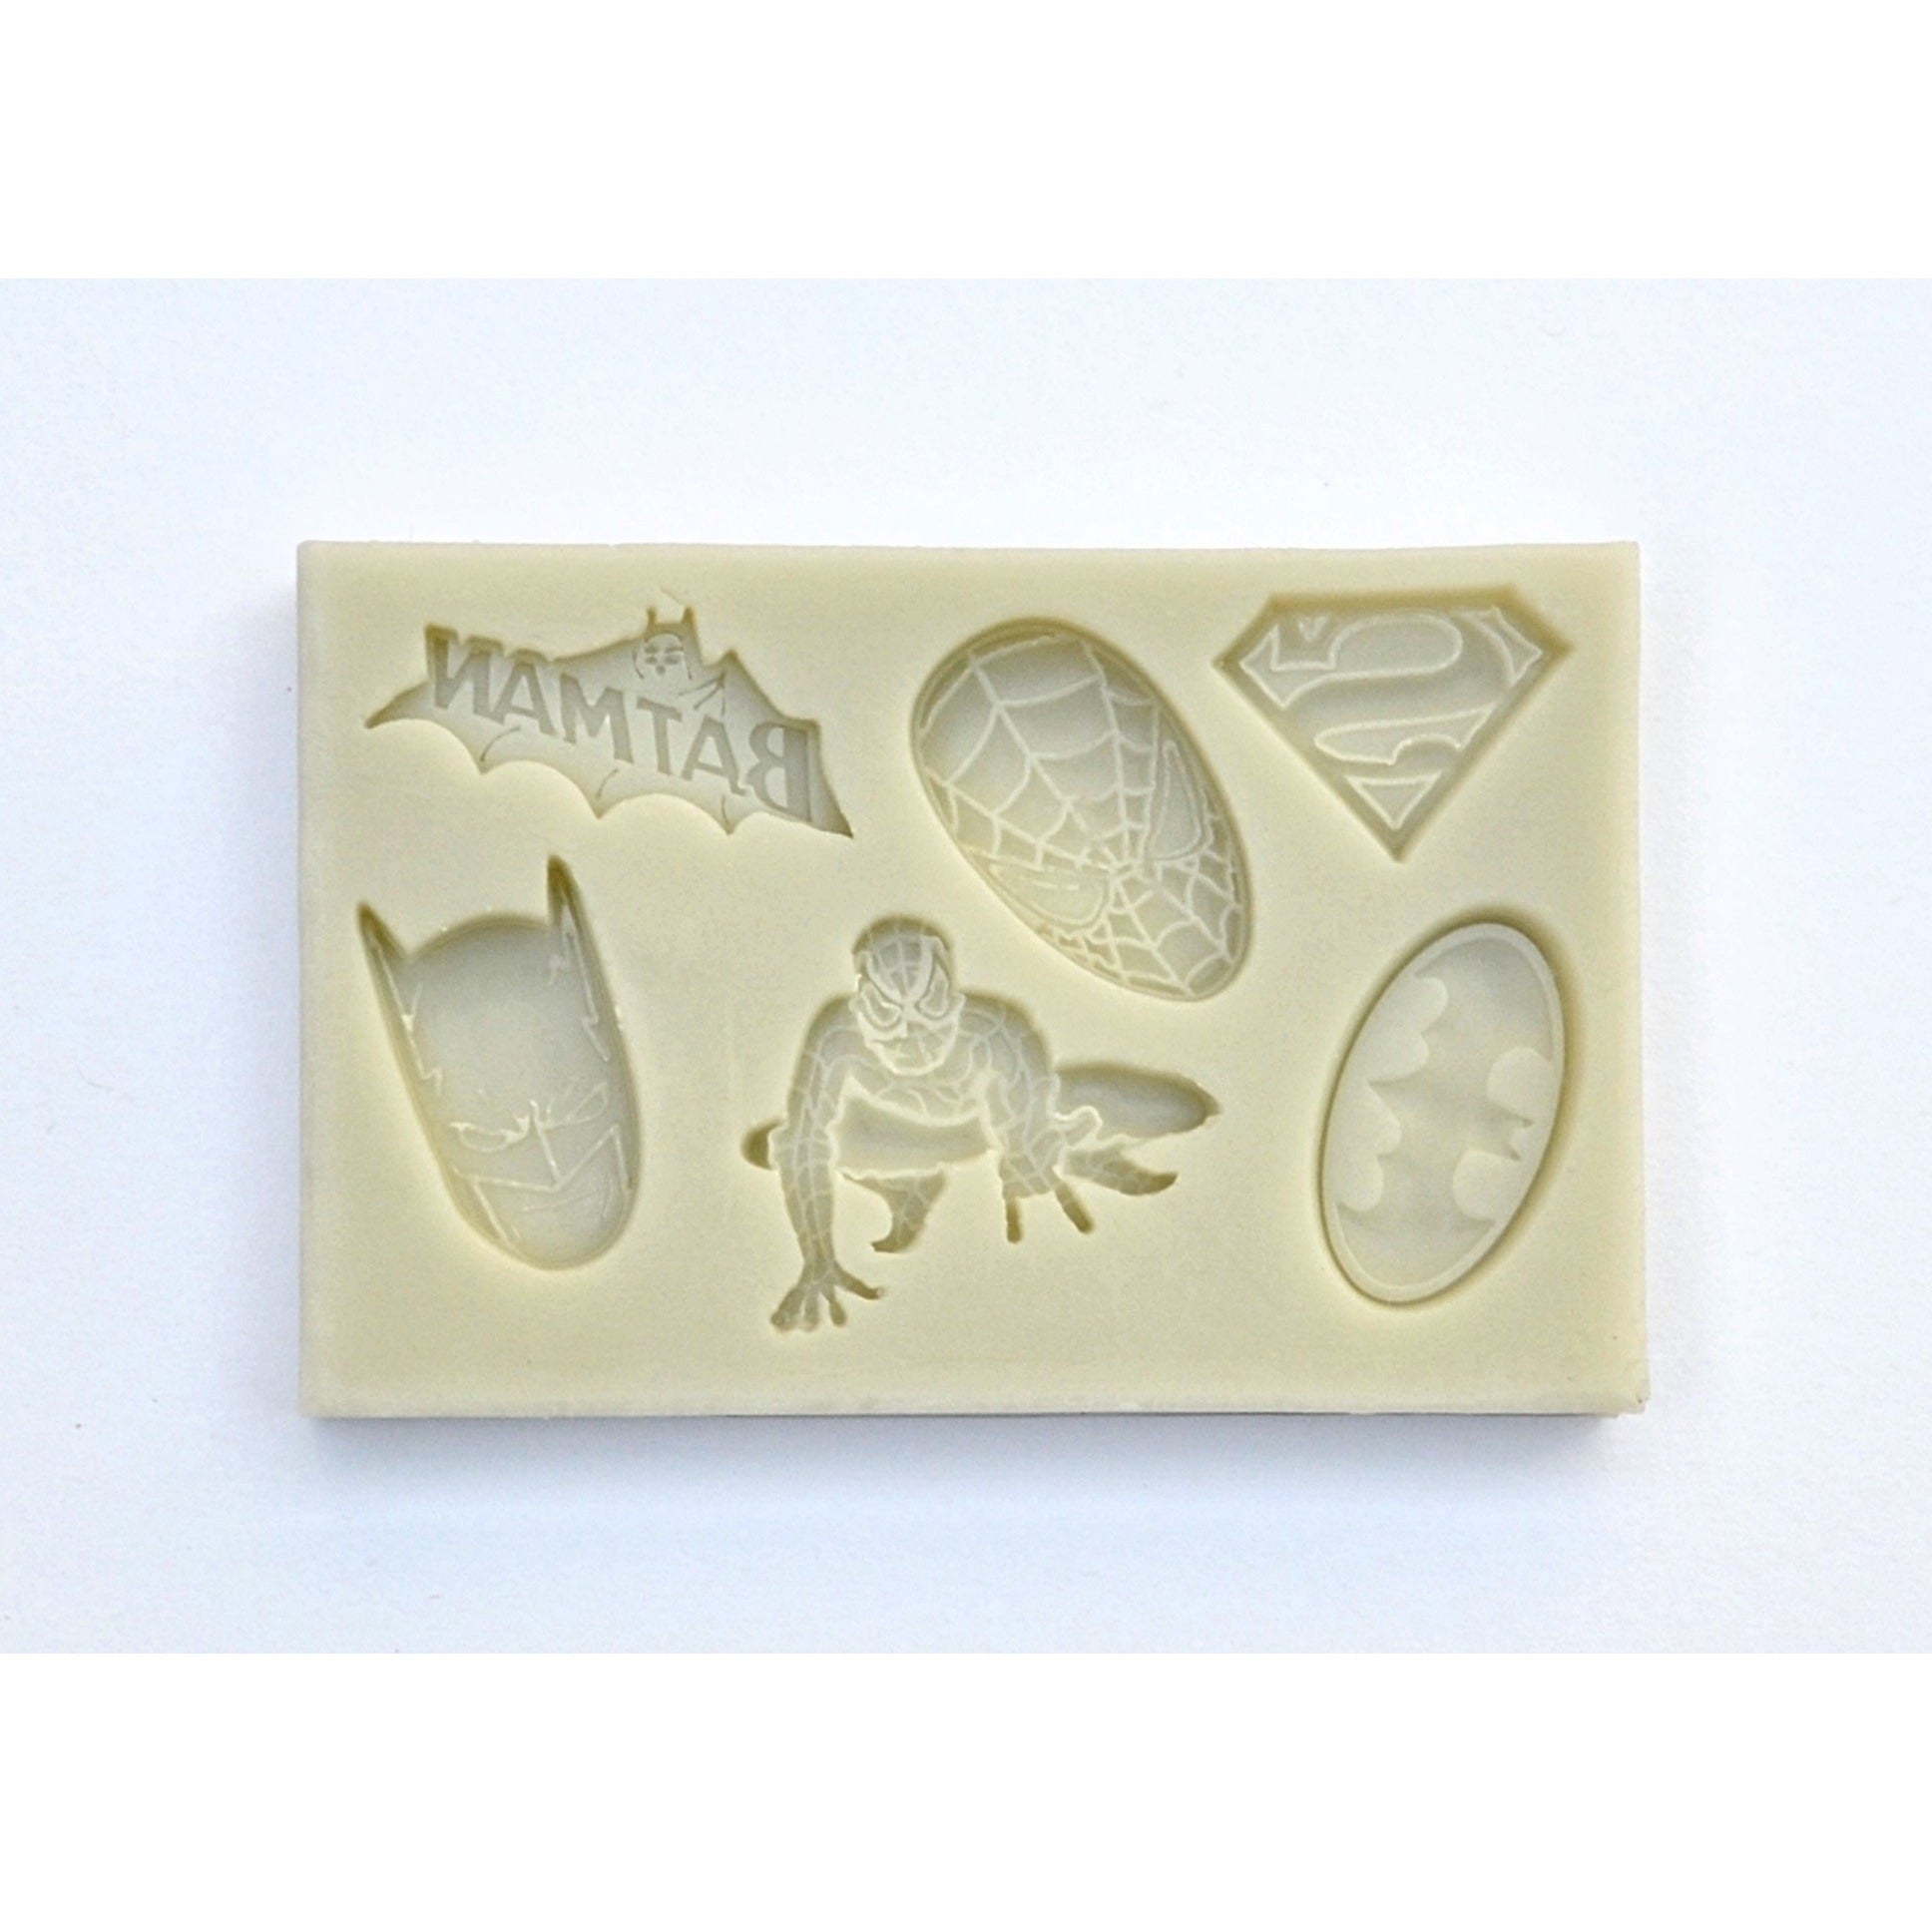 Sillicone Silicone Cube Mold For Resin Art And Wax molding - Silicone Cube  Mold For Resin Art And Wax molding . Buy Silicone Cube Mold toys in India.  shop for Sillicone products